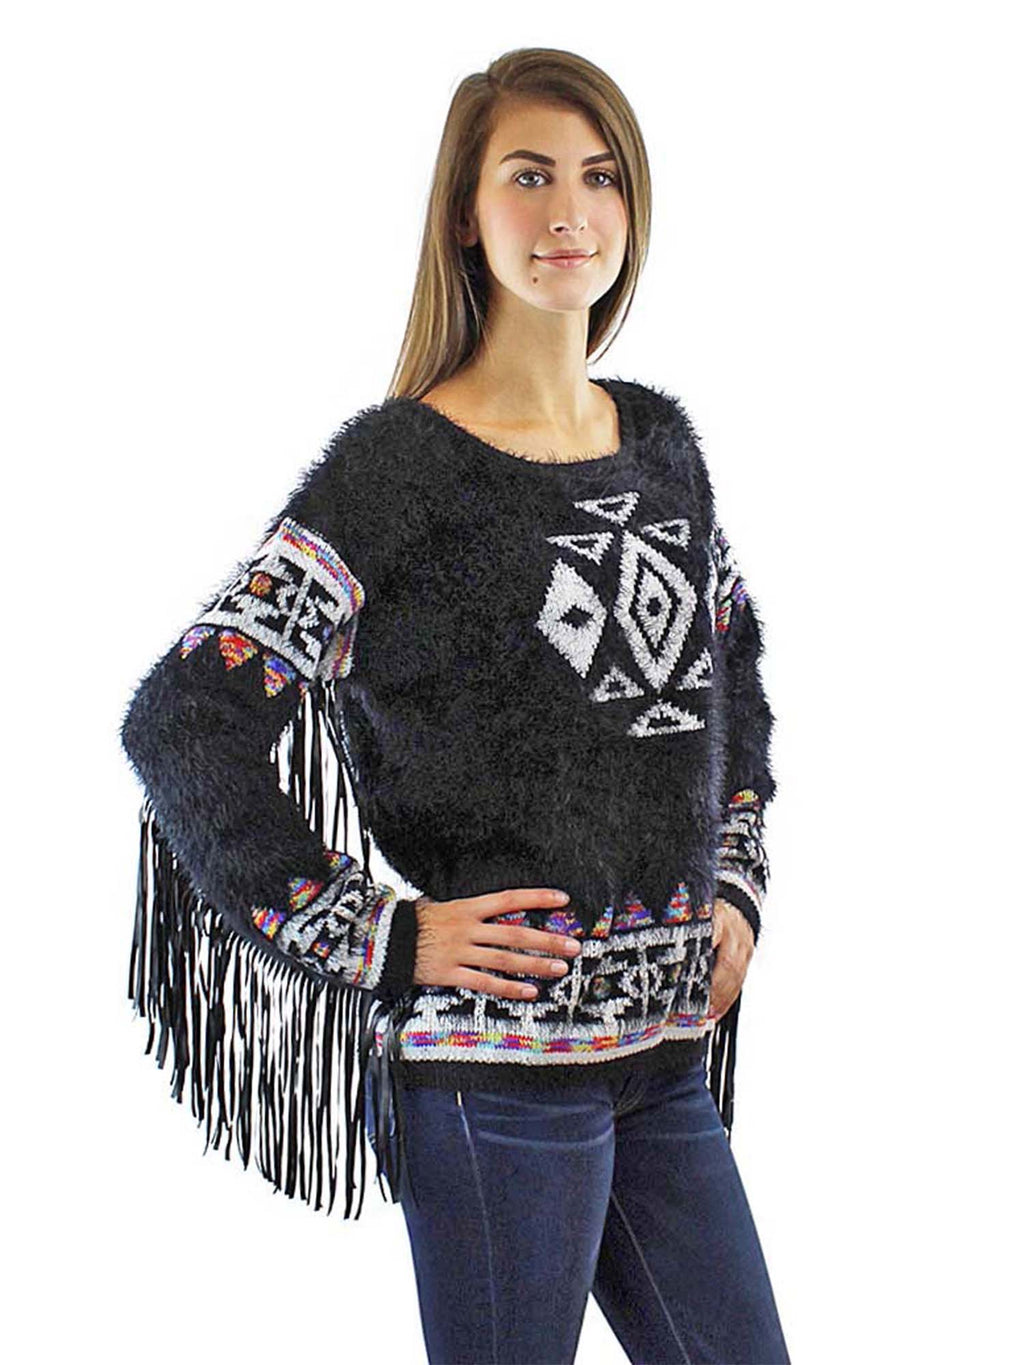 Black & White Fuzzy Knit Sweater With Fringed Sleeves